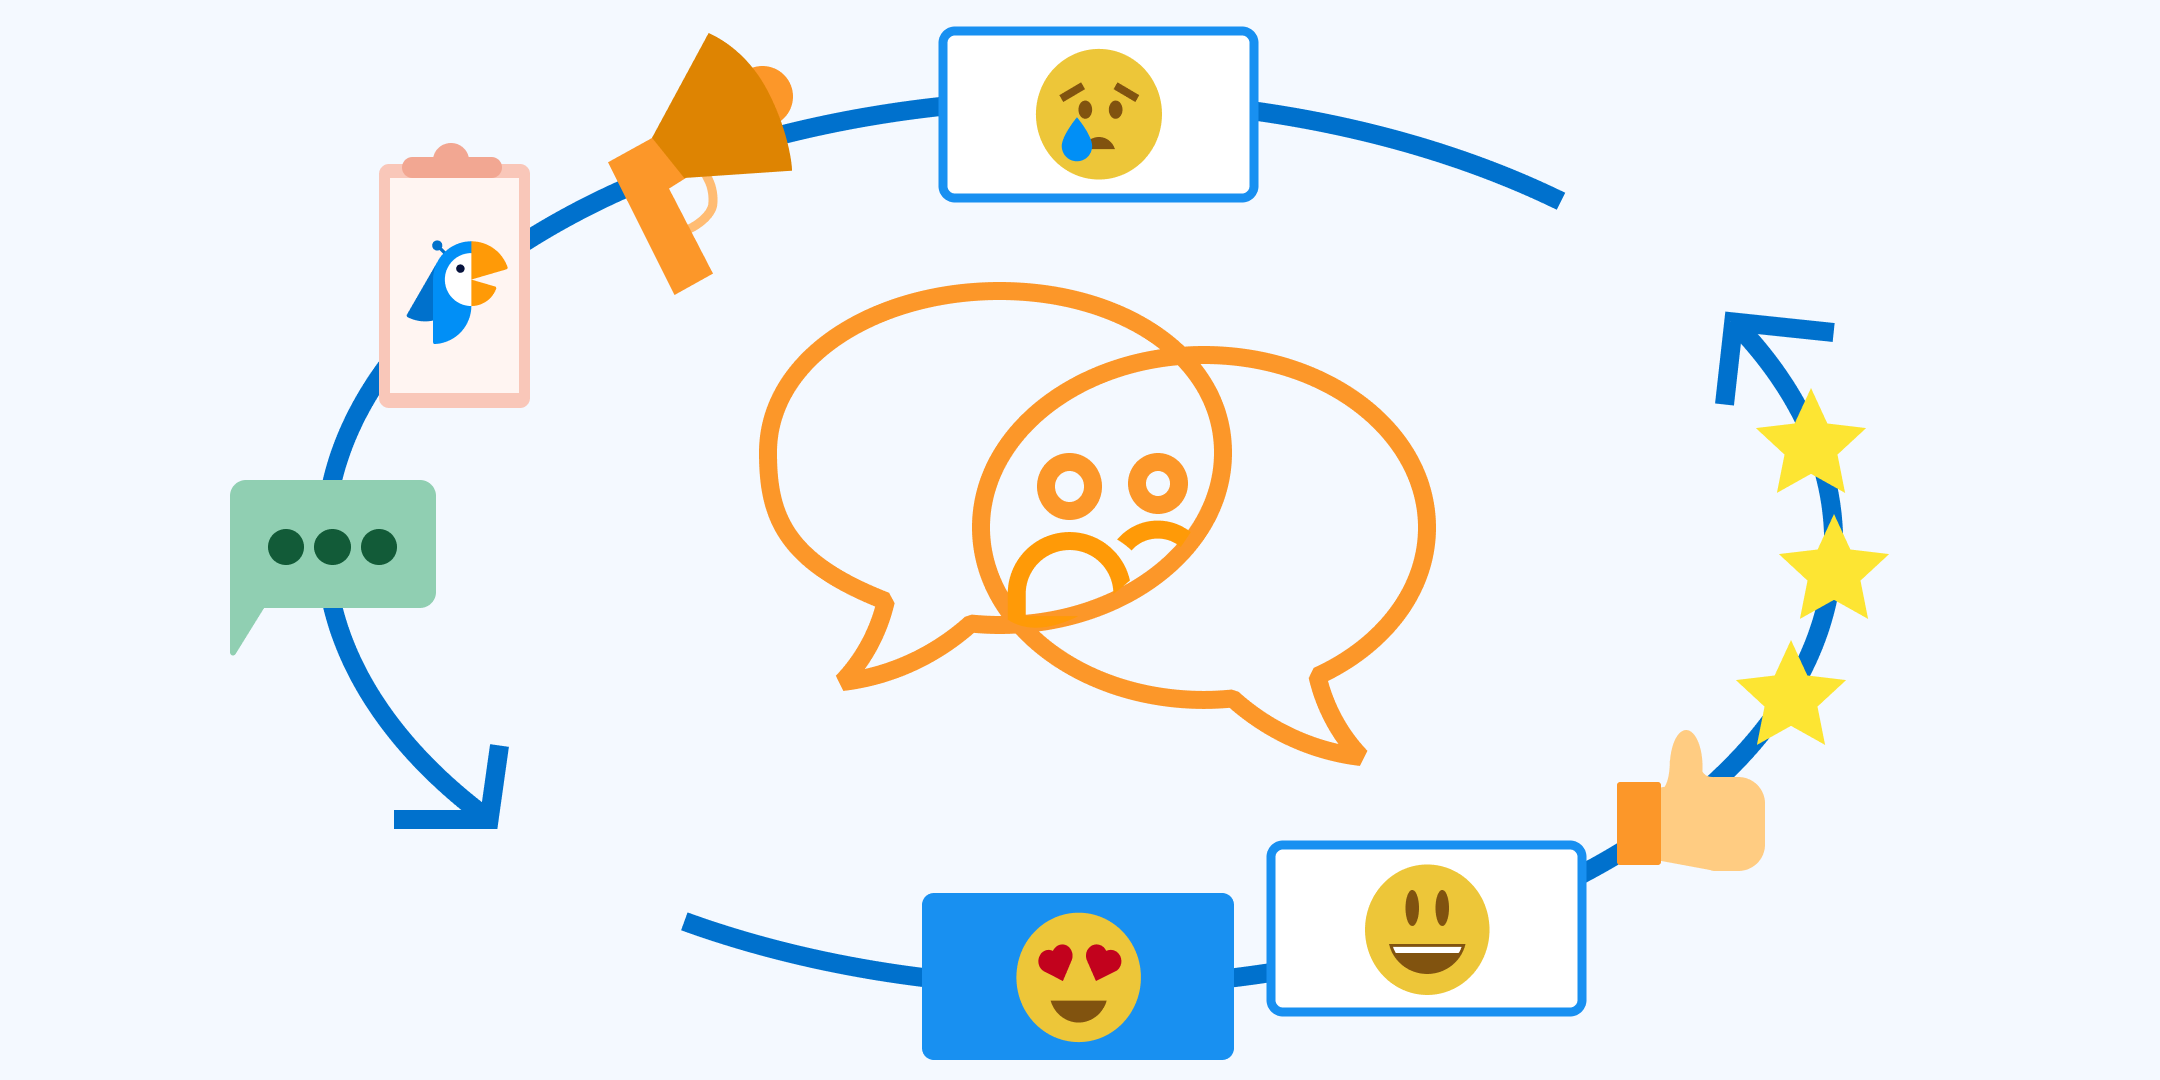 Survey fatigue: various icons surrounding 2 chat icons